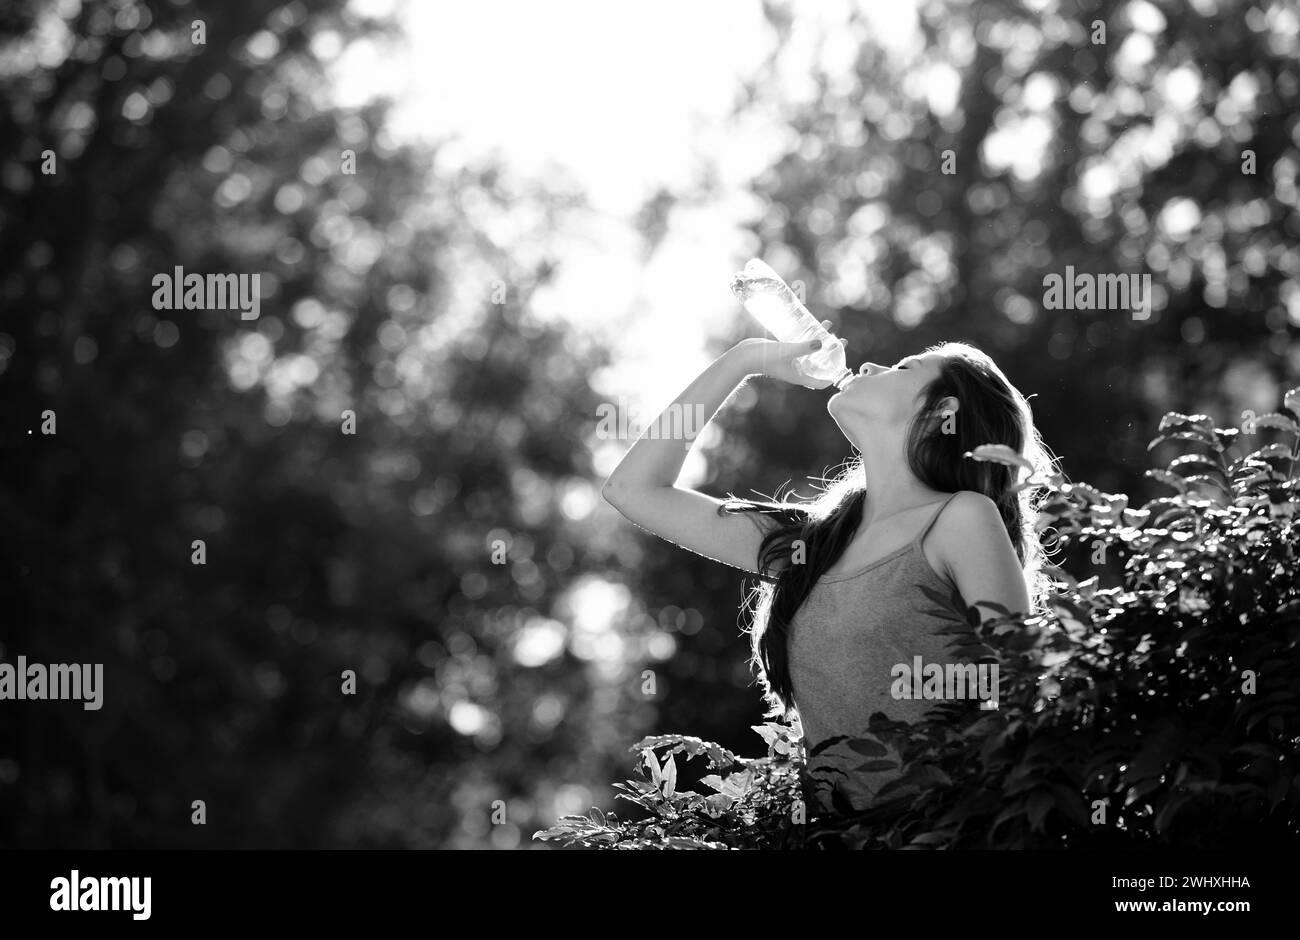 Healthy woman drinking water from bottle. Stay hydration concept. Unhidrated. Unity with nature, outdoor. Stock Photo